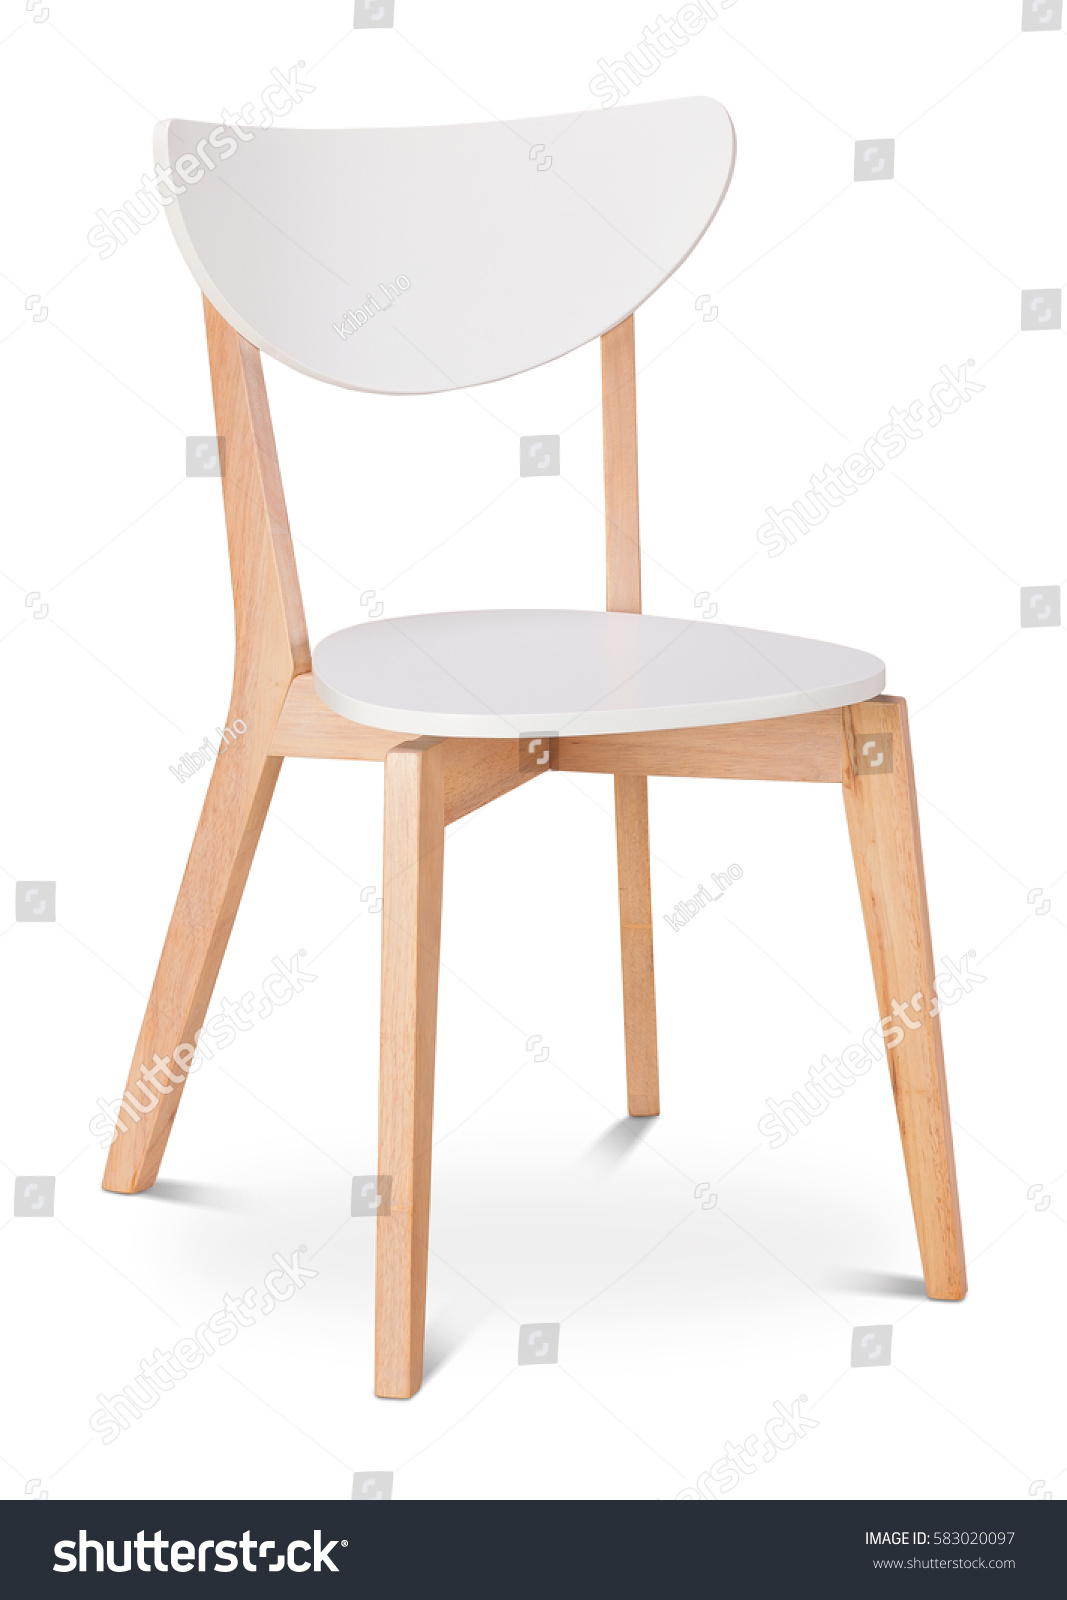 White color chair, plastic, wooden, leather chair, modern designer. Chair isolated on white background. Series of furniture #583020097